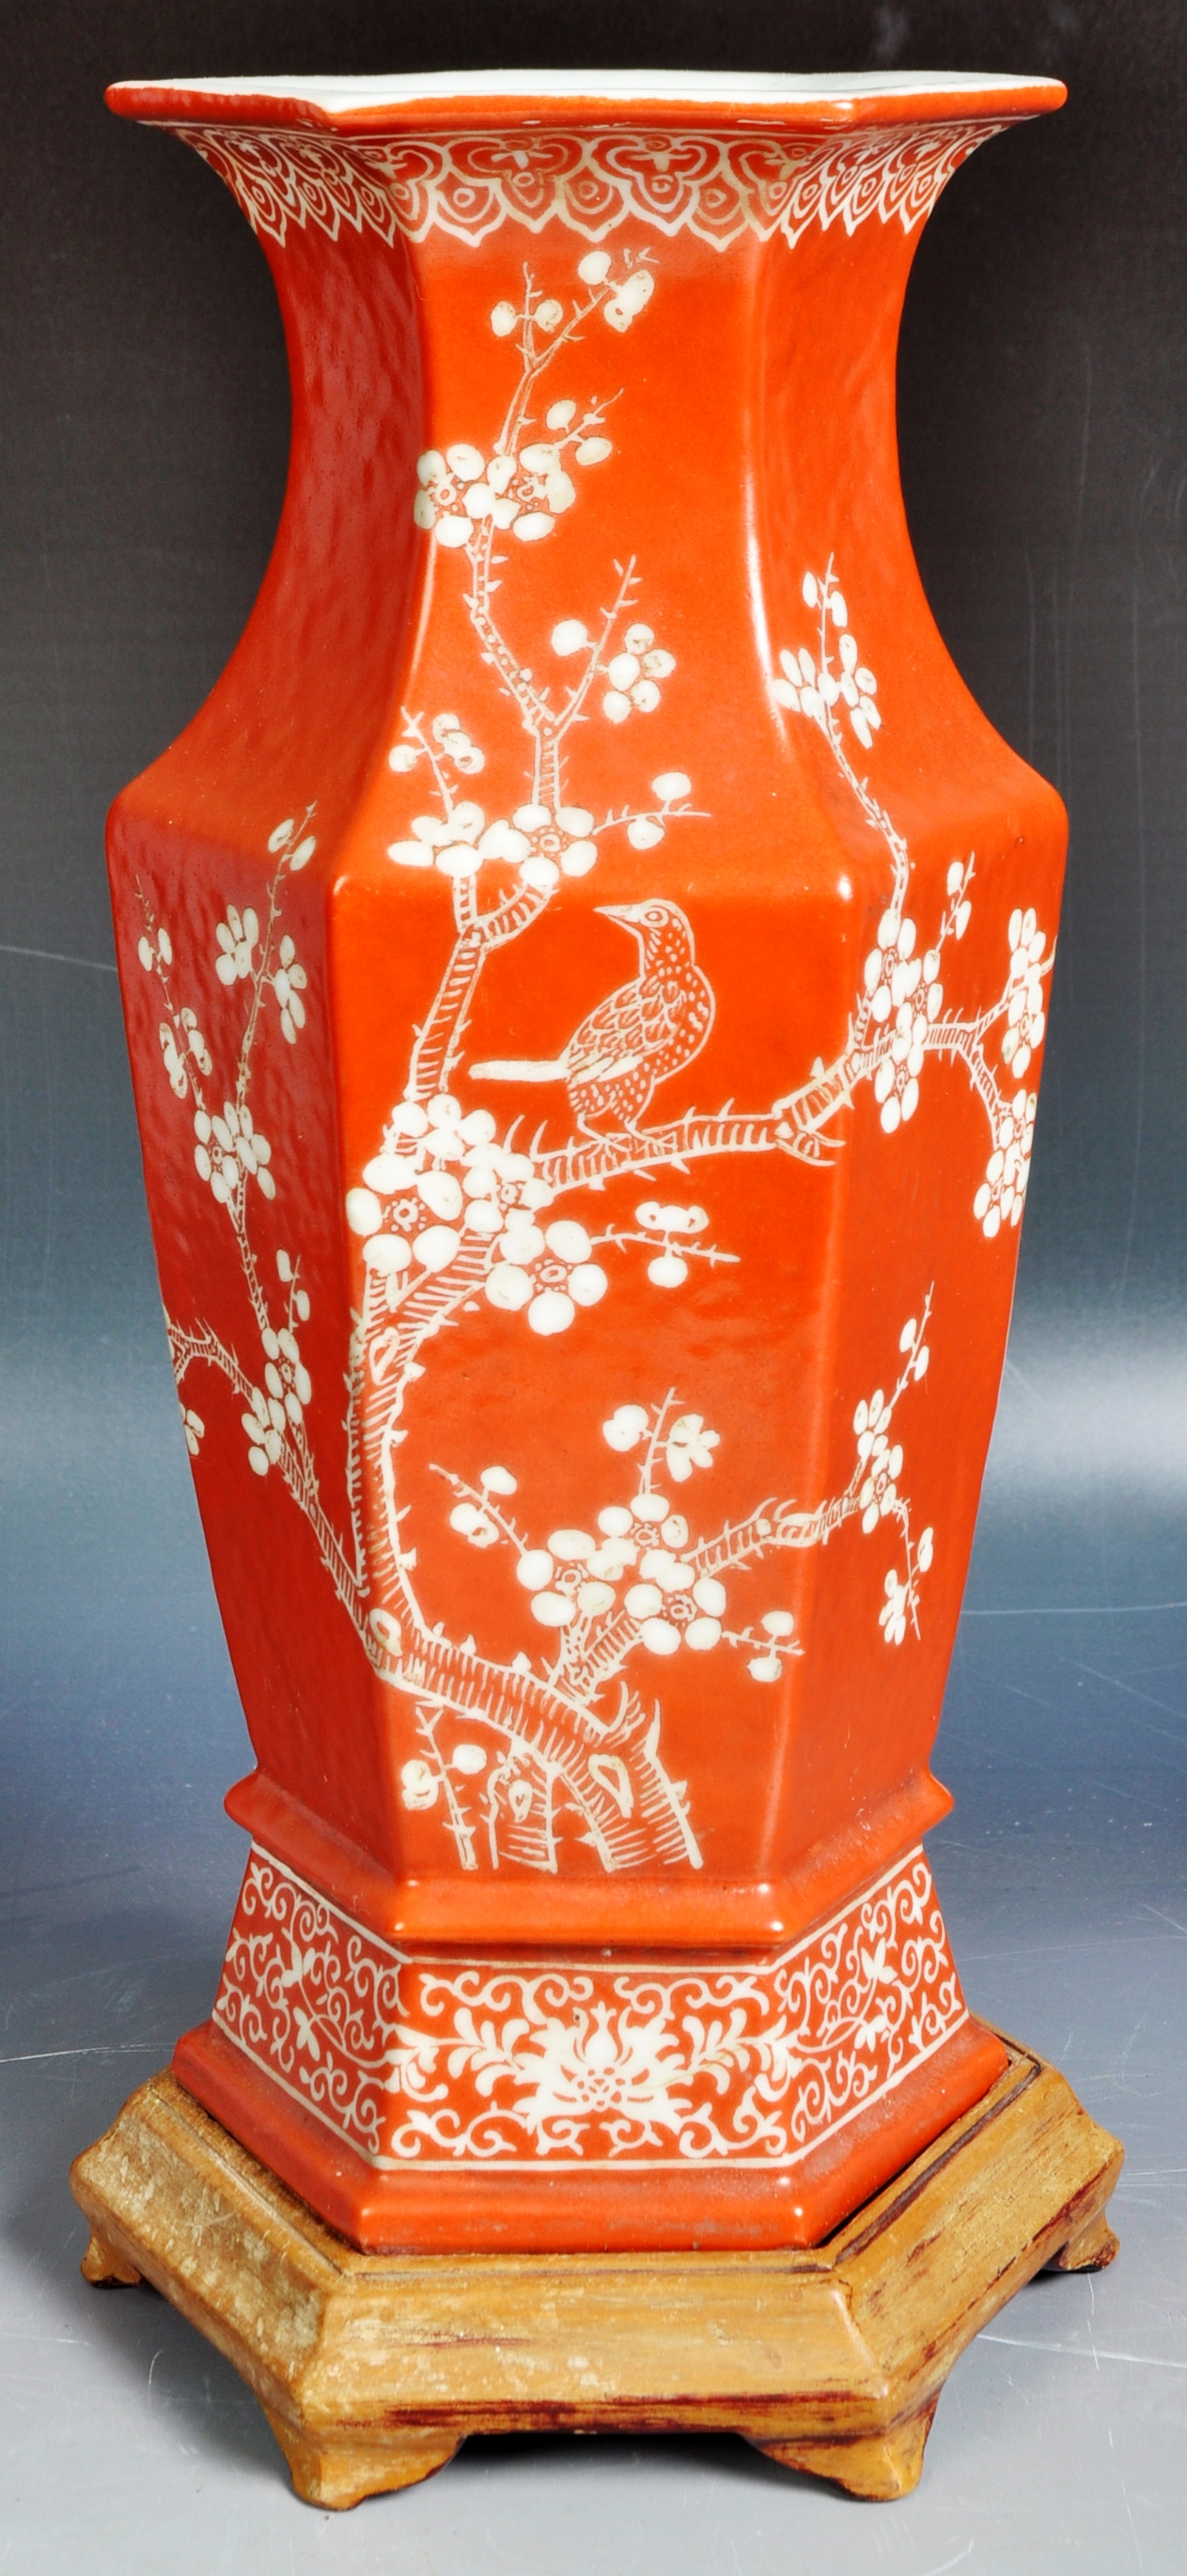 EARLY 20TH CENTURY CHINESE PORCELAIN OCHRE VASE - Image 2 of 8